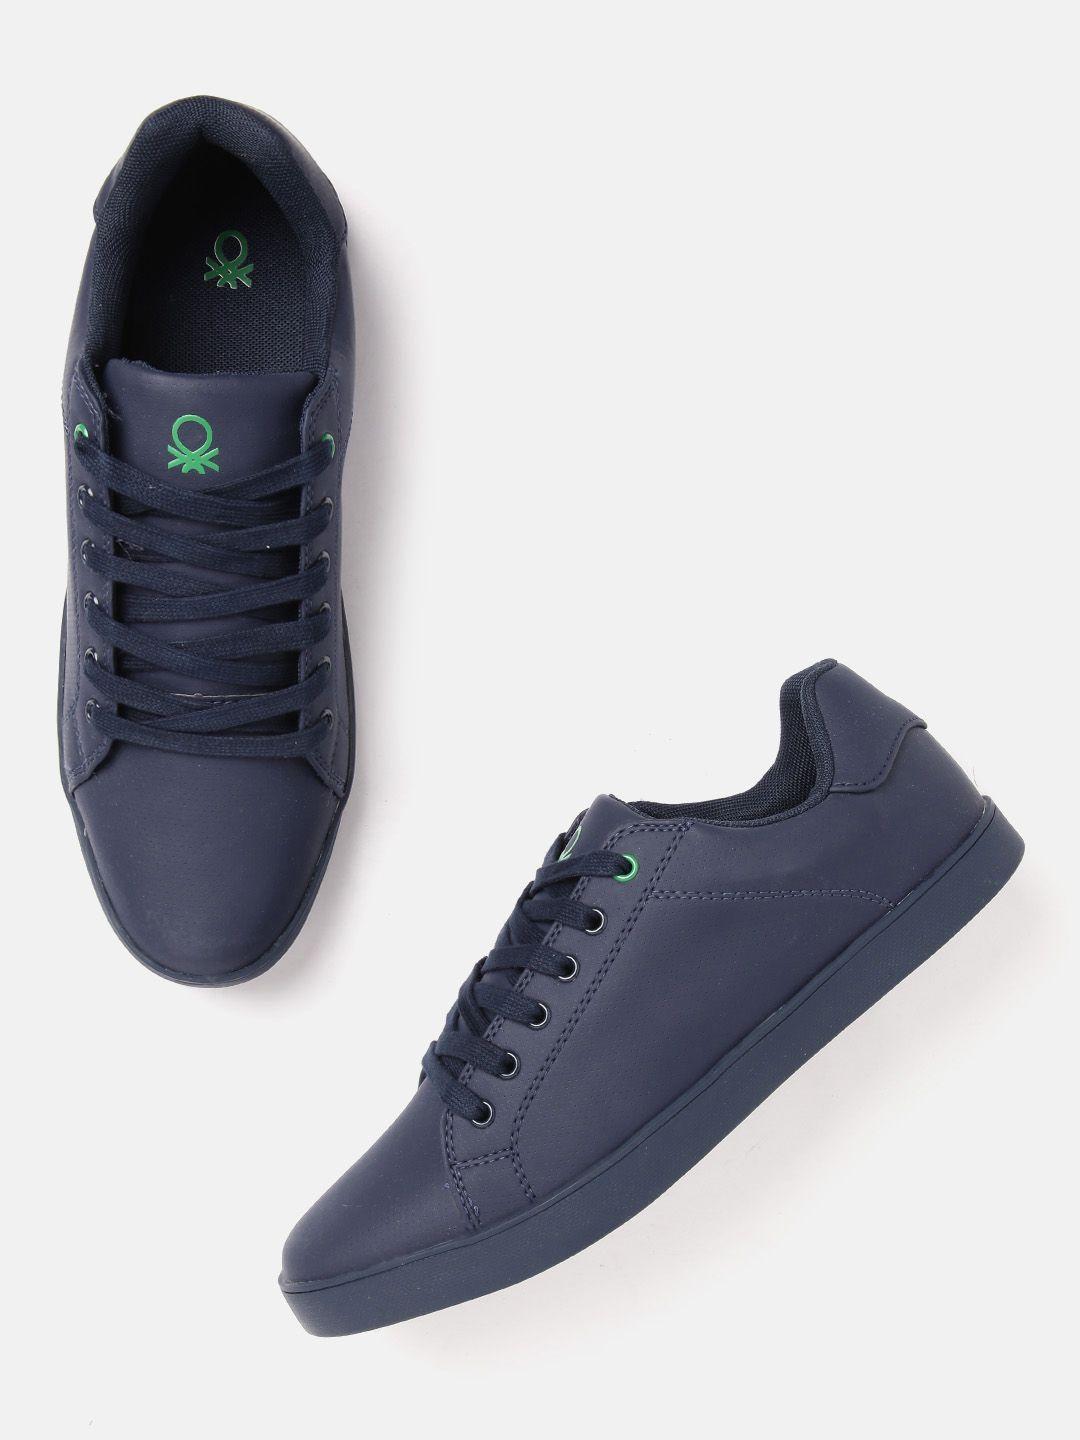 united colors of benetton men navy perforated sneakers